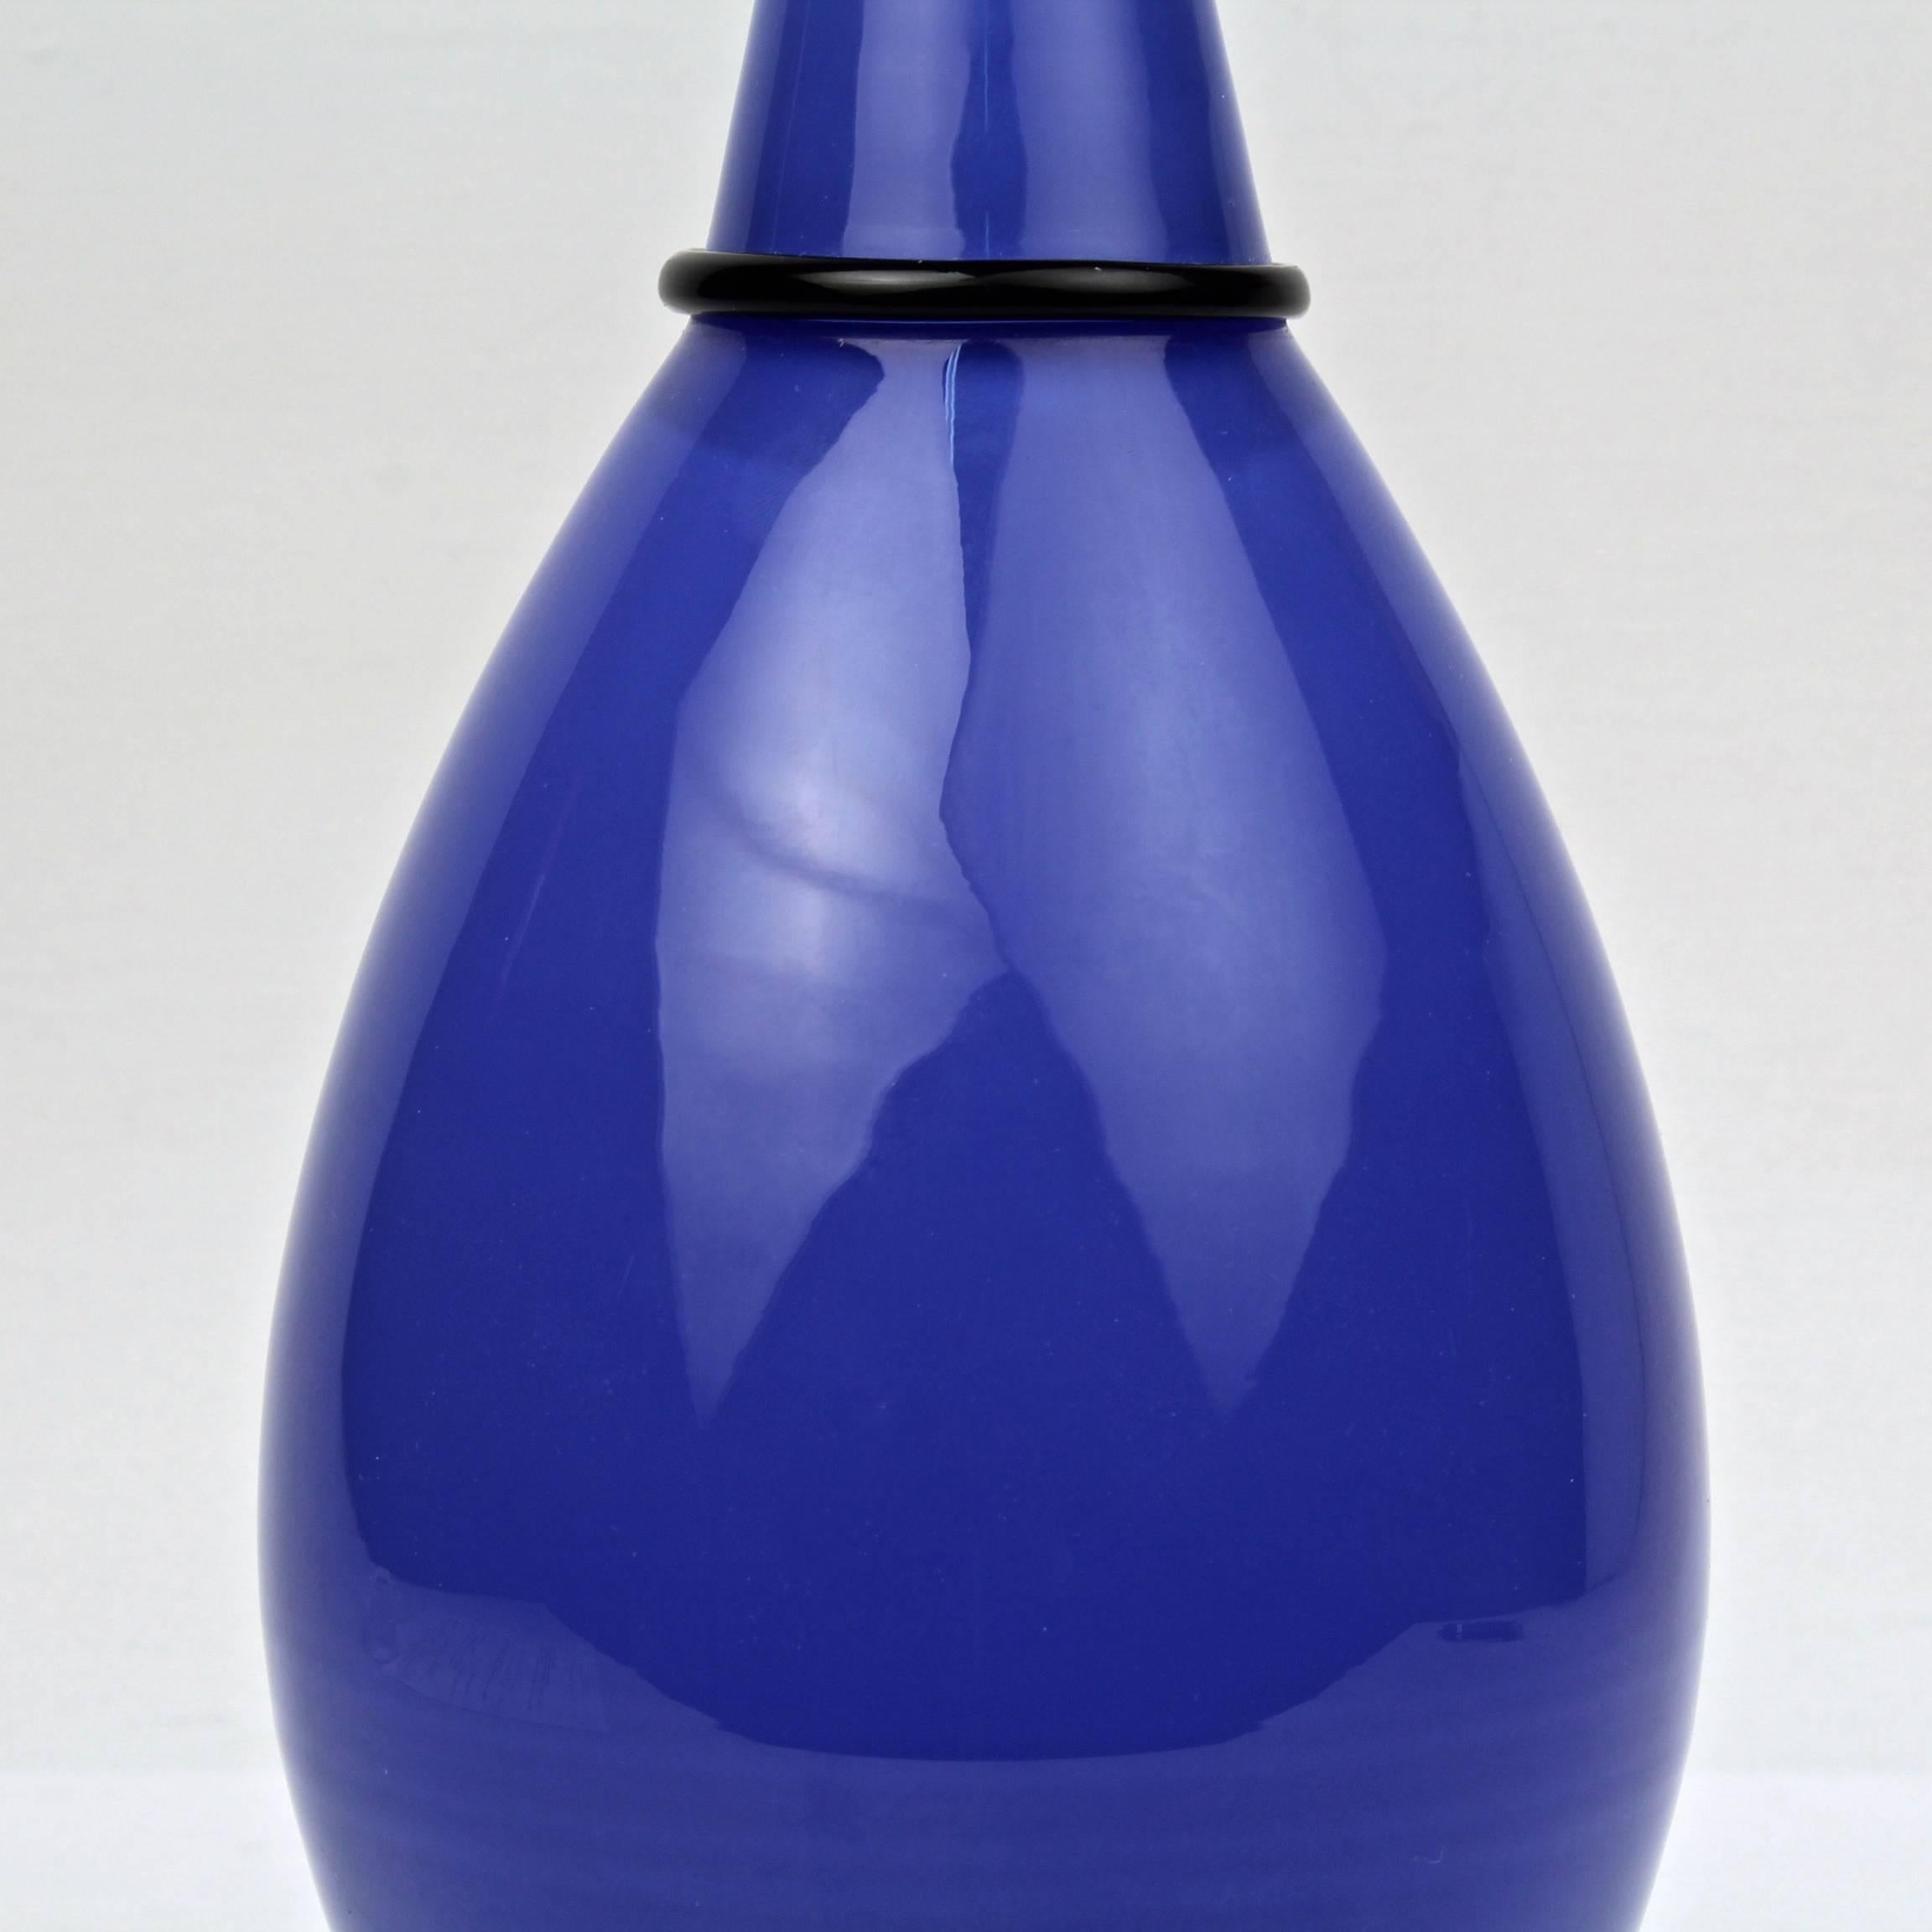 Mid-Century Modern Blue Murano Glass Vase by Tagliapietra & Angelin for Effetre International, 1985 For Sale